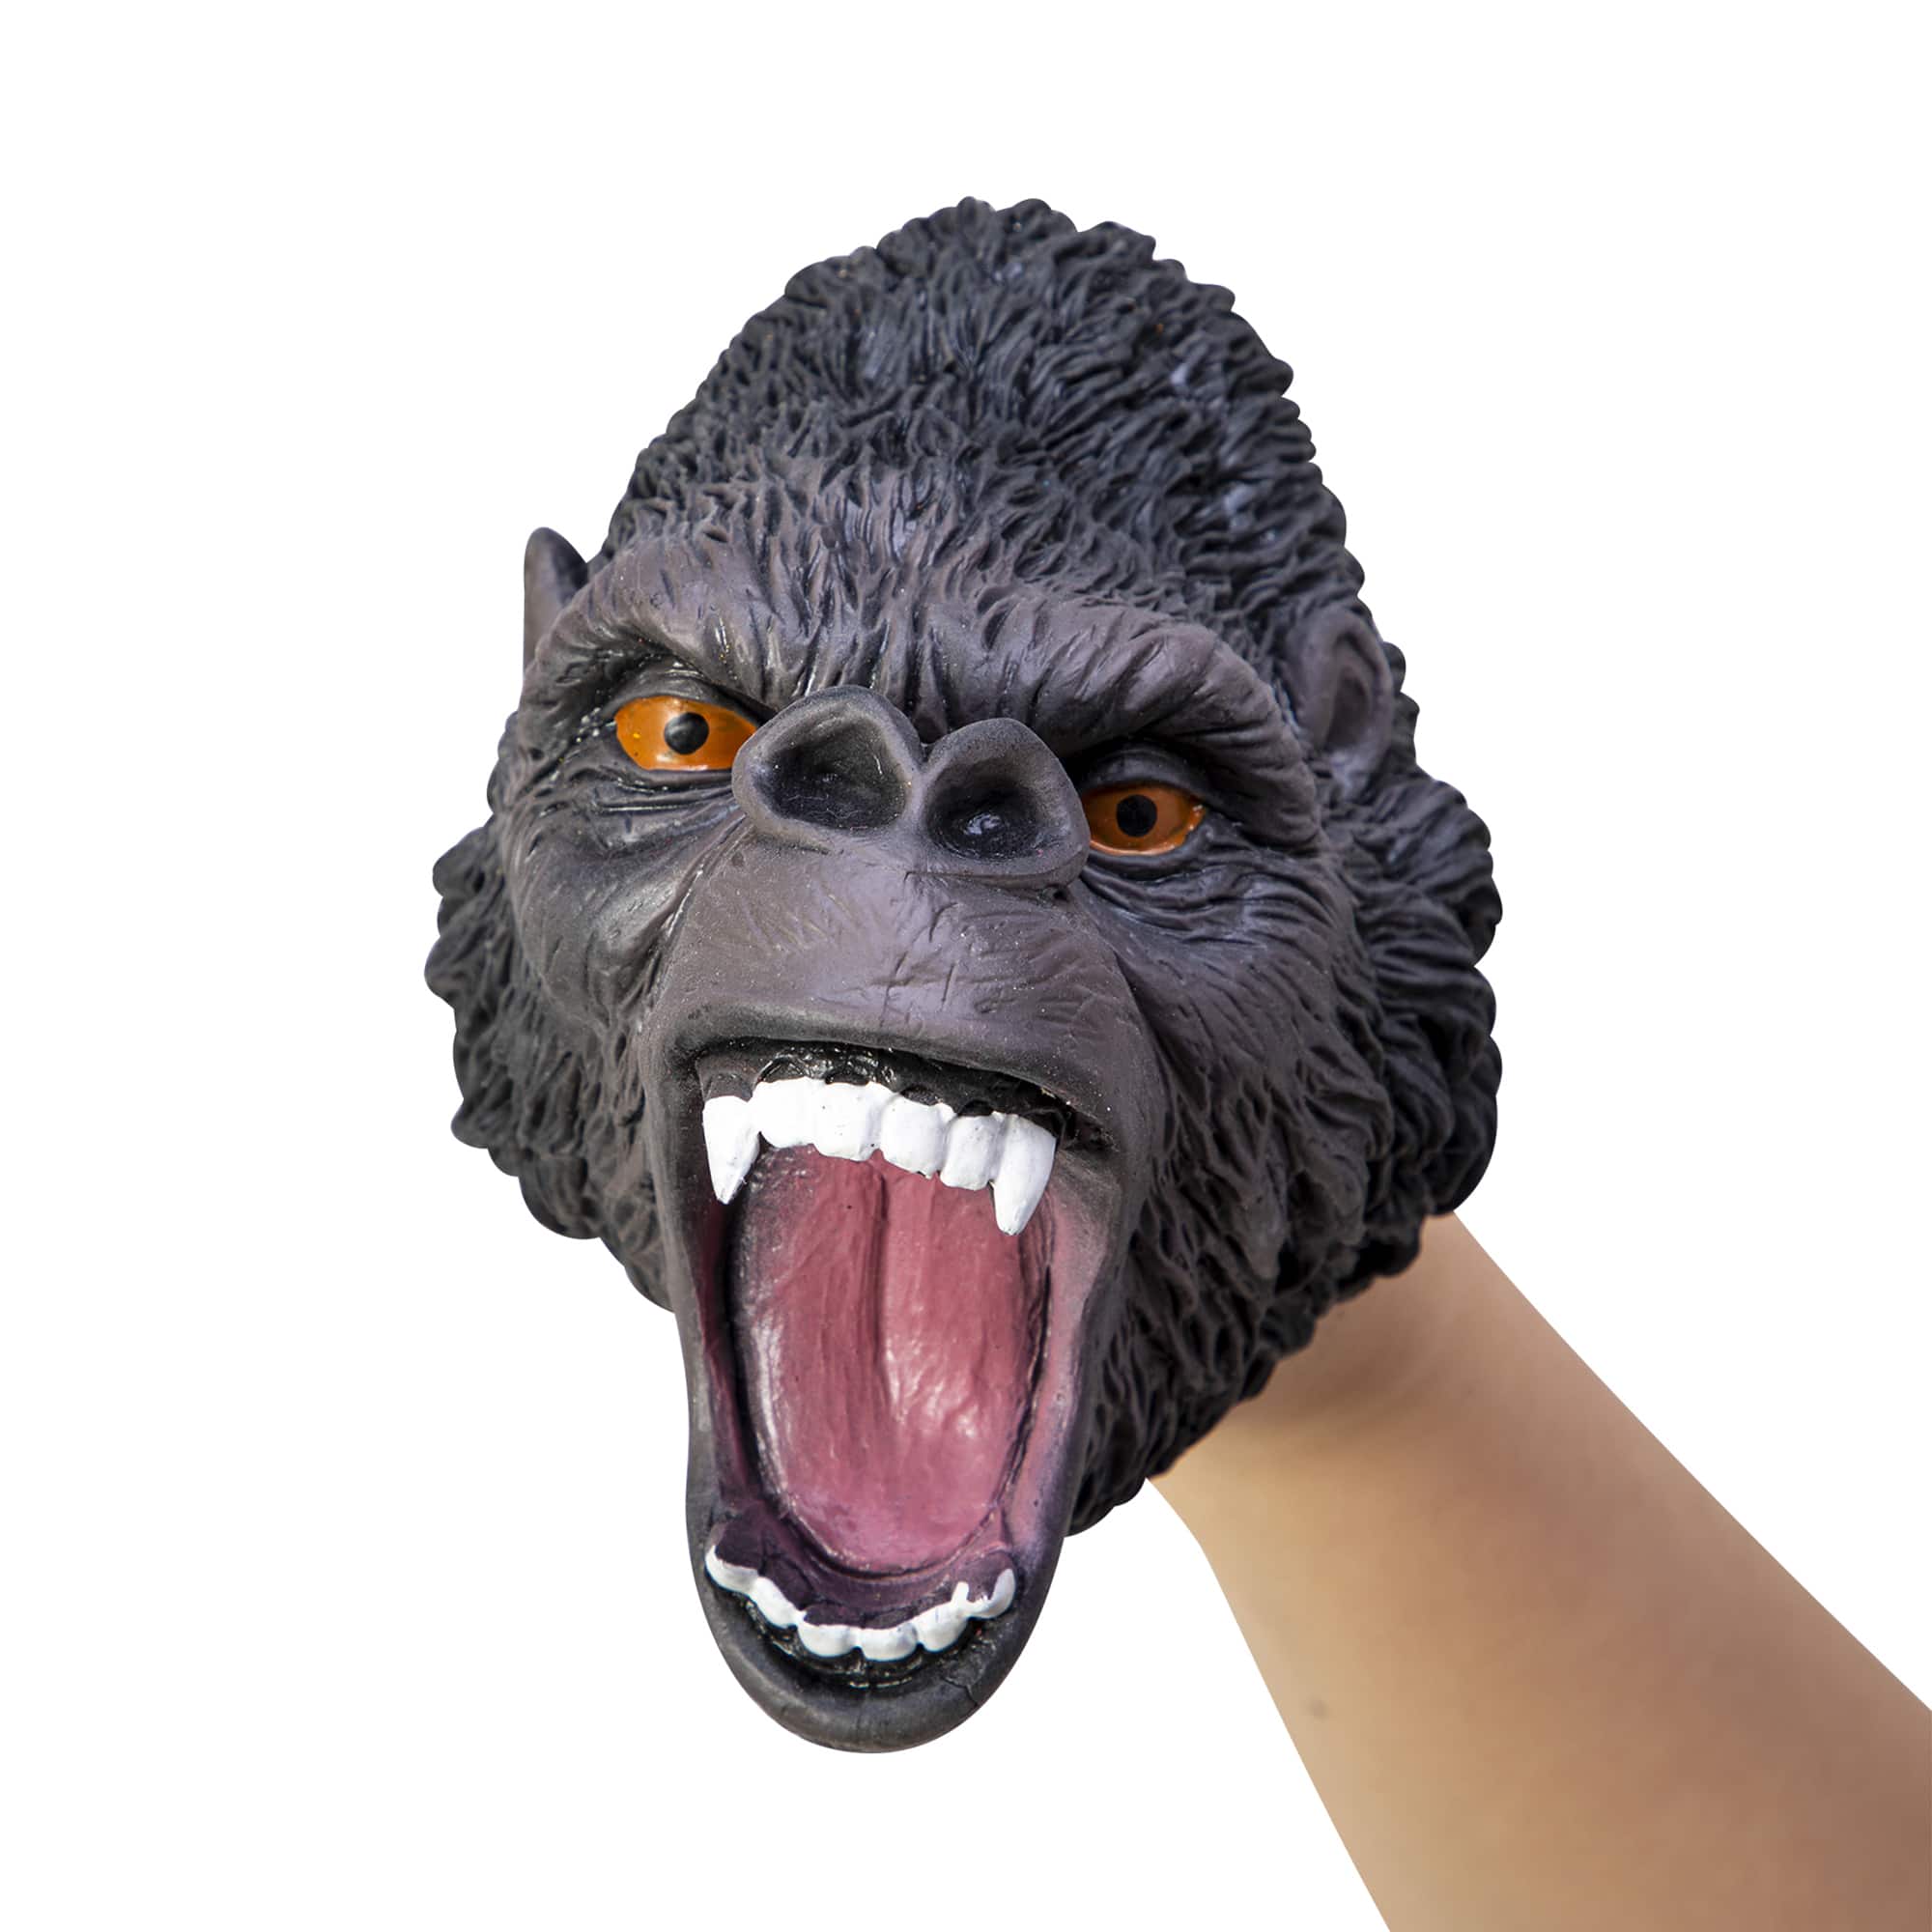 Front view of the Gorilla Hand Puppet on a person's hand.